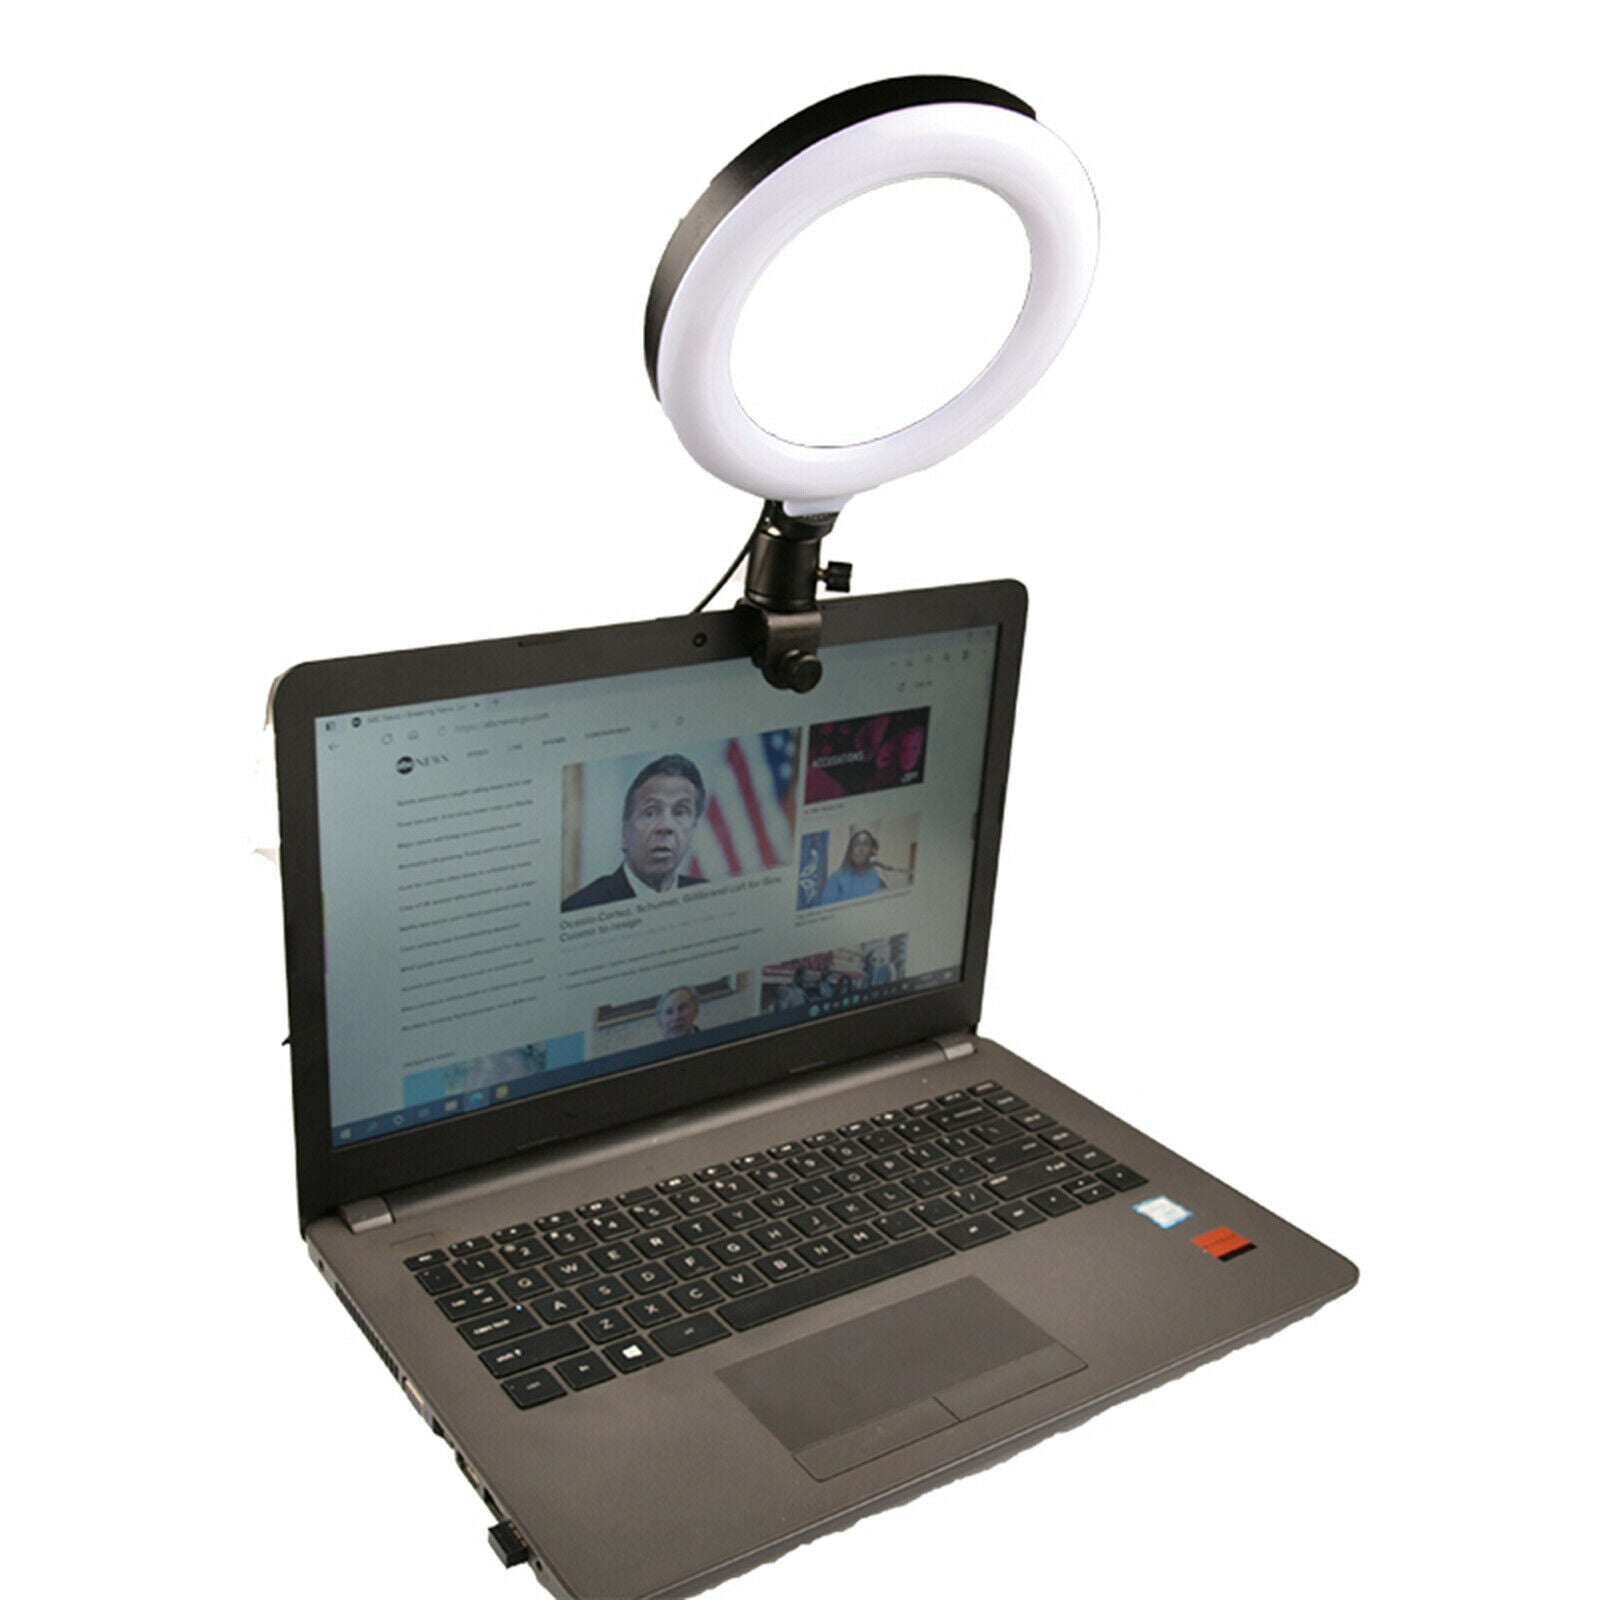 6inch Ring Light for Computer Video Conference Lighting Kit Dimmable Lights